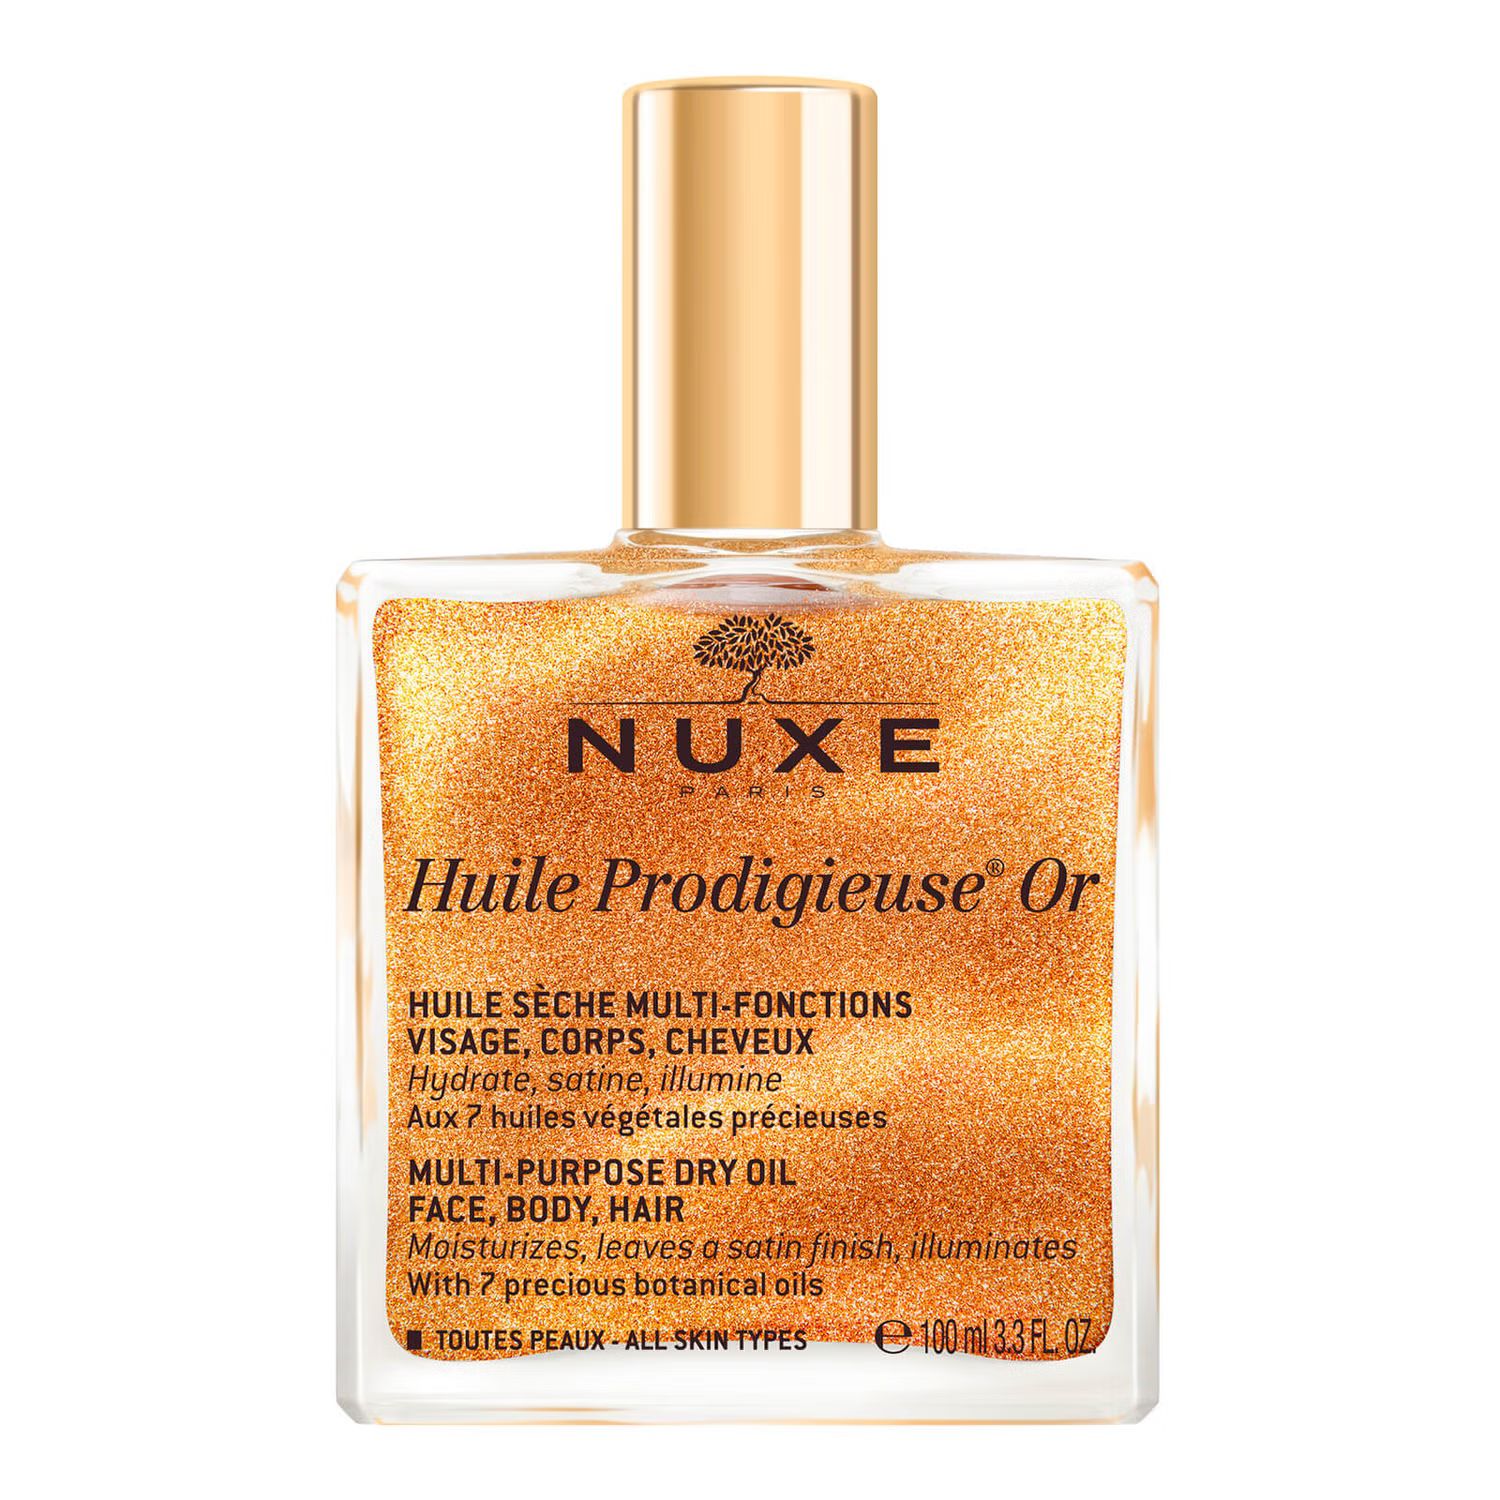 NUXE Huile Prodigieuse Golden Shimmer Multi-Purpose Dry Oil 100ml | Look Fantastic (ROW)